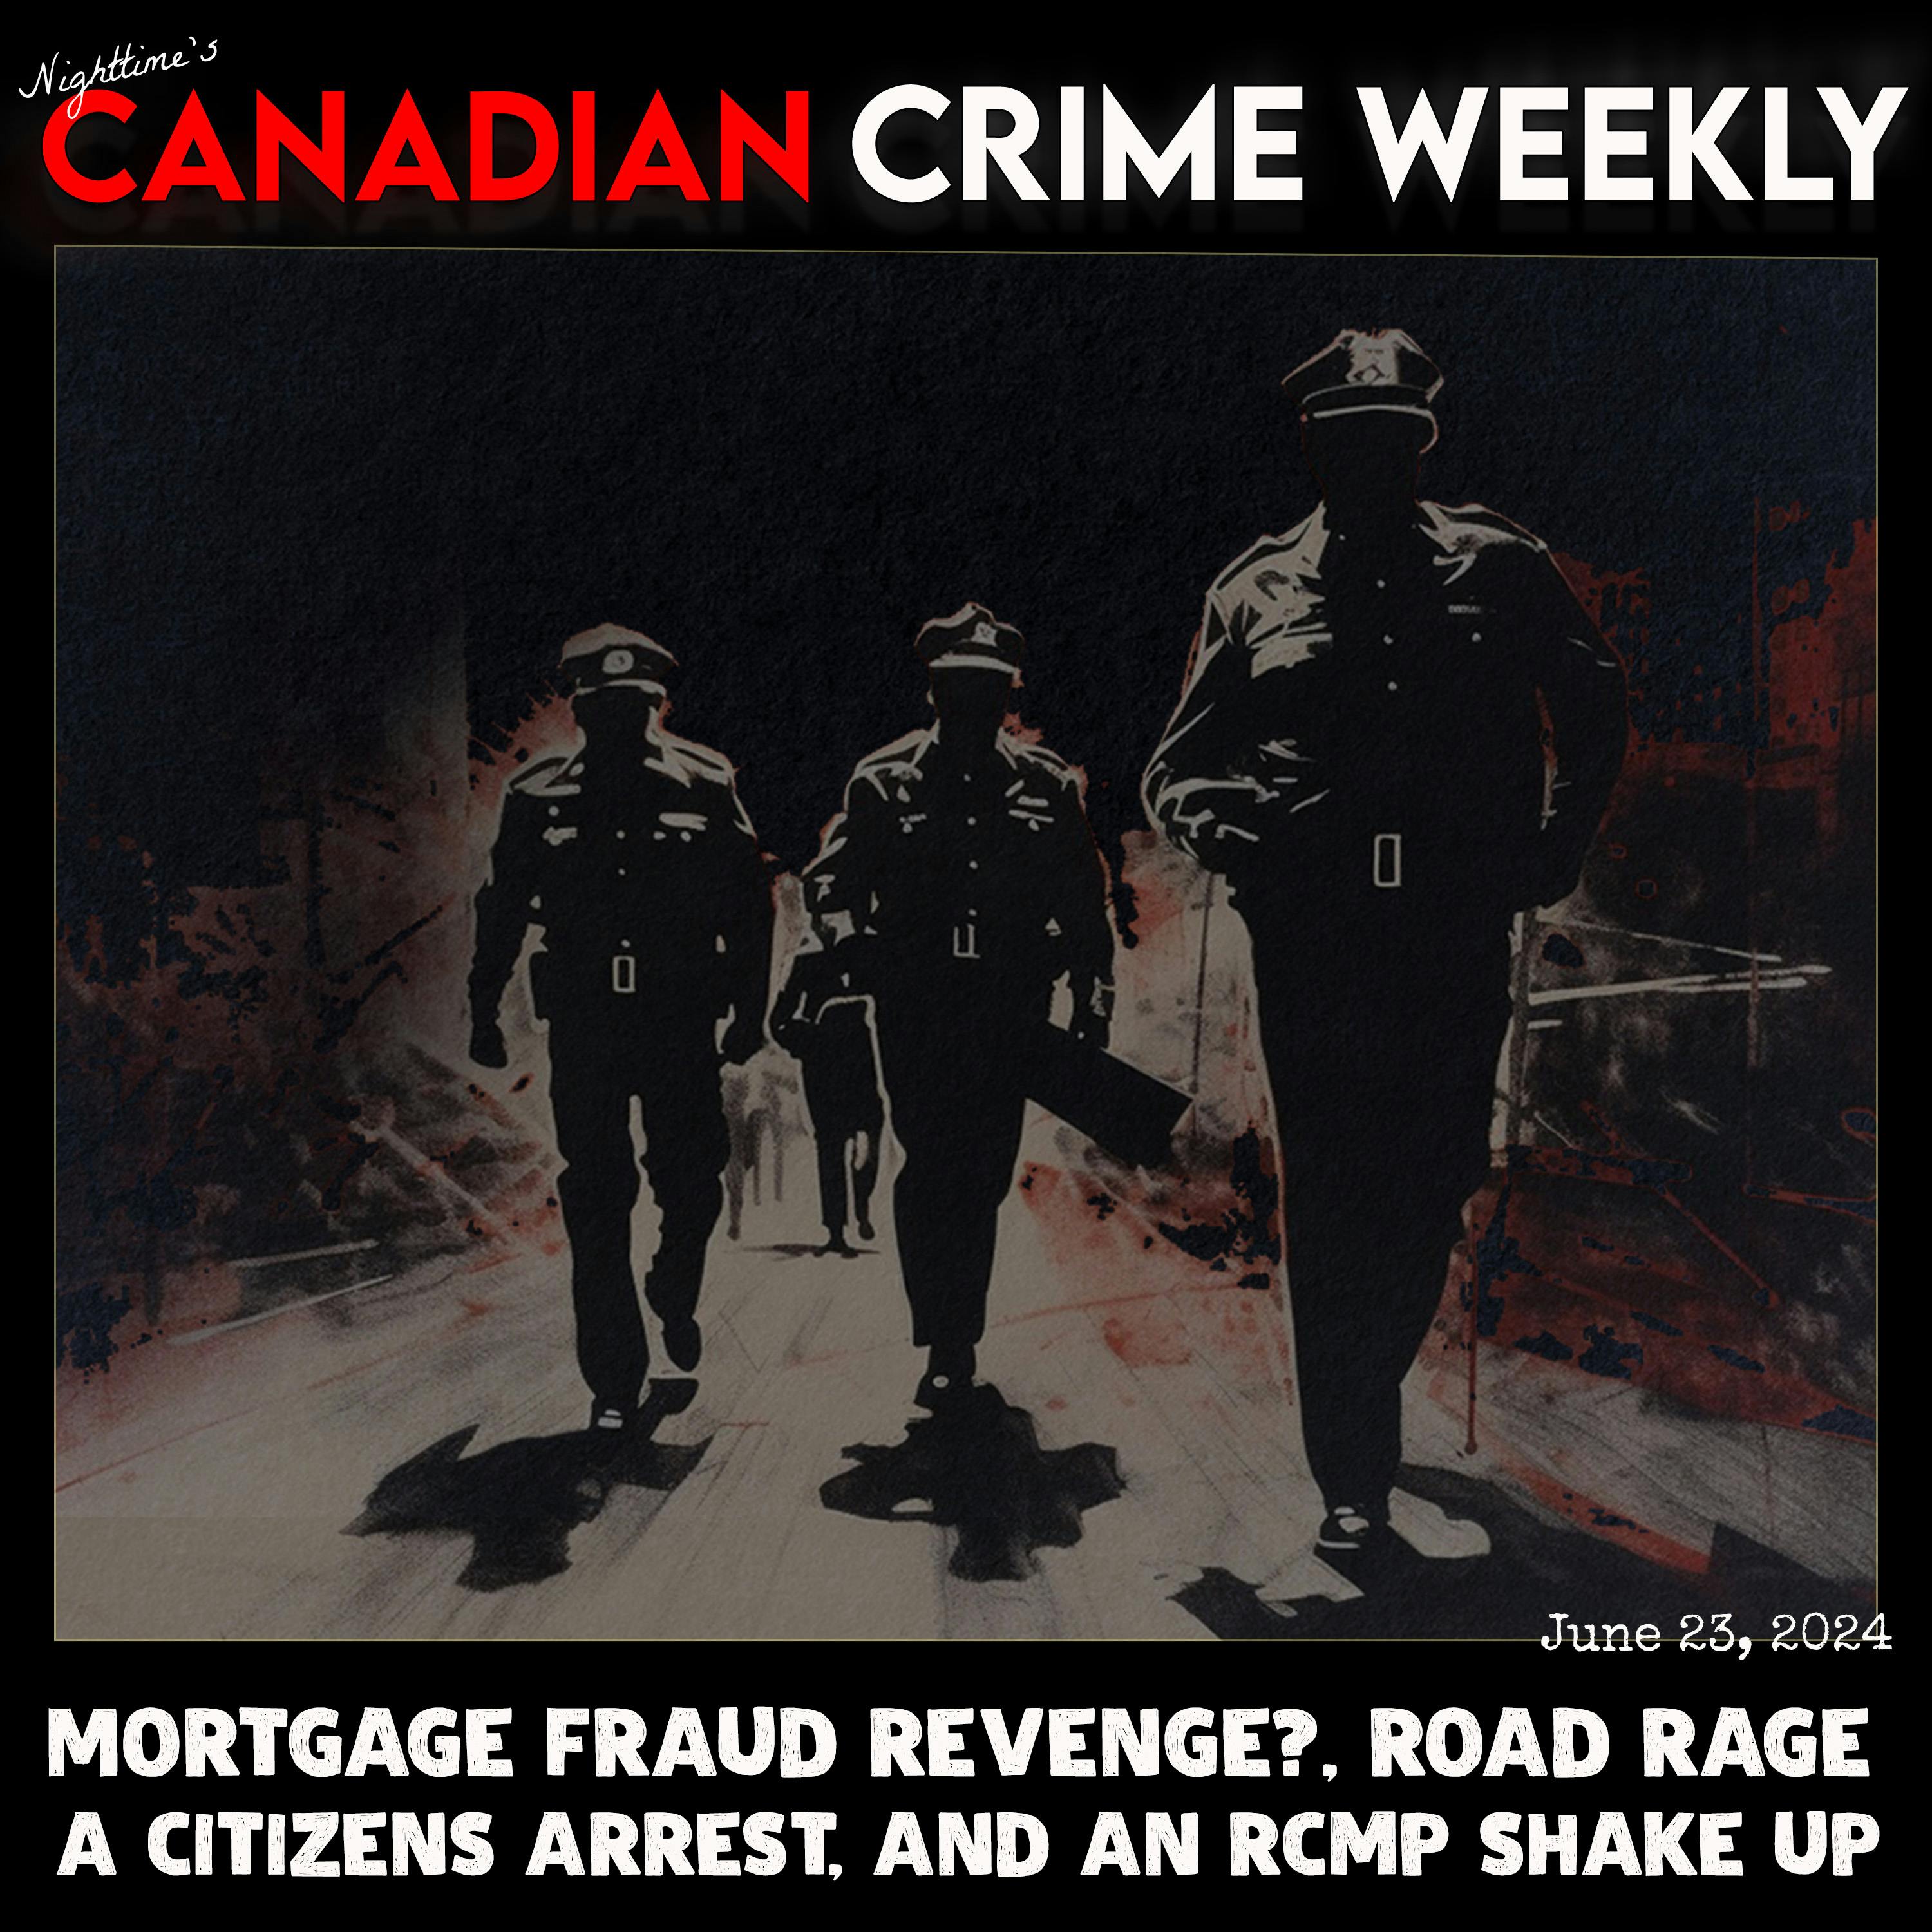 Canadian Crime Weekly - June 23, 2024 - the mortgage fraud double murder / suicide, road raging with a knife, and a citizen's arrest in Ottawa